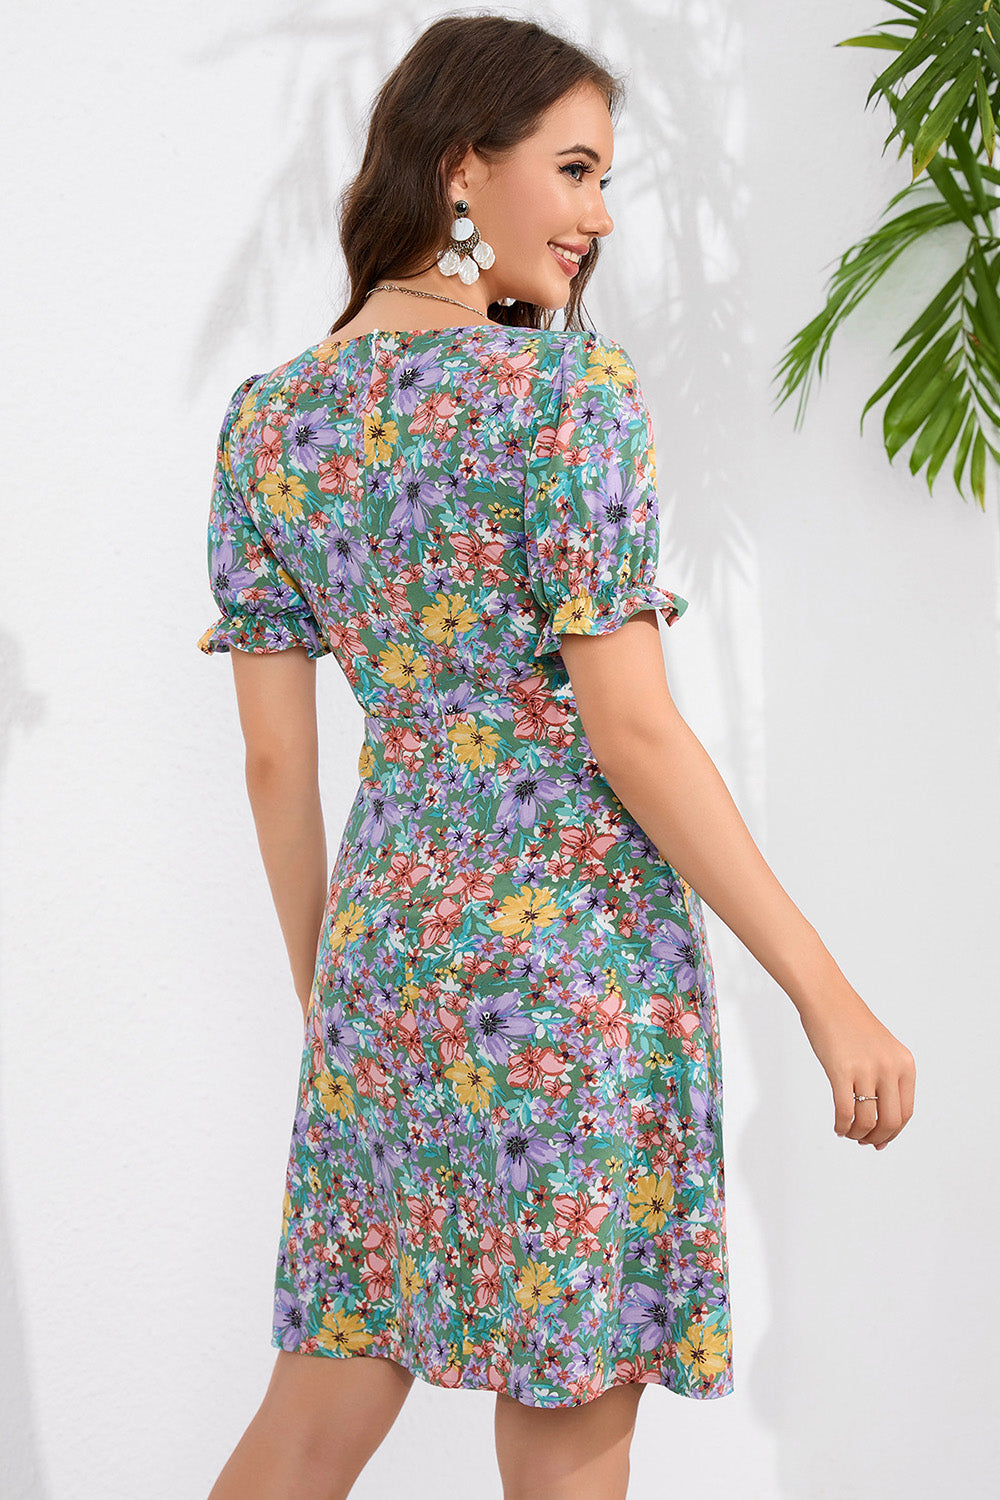 Floral Printed Summer Casual Dress